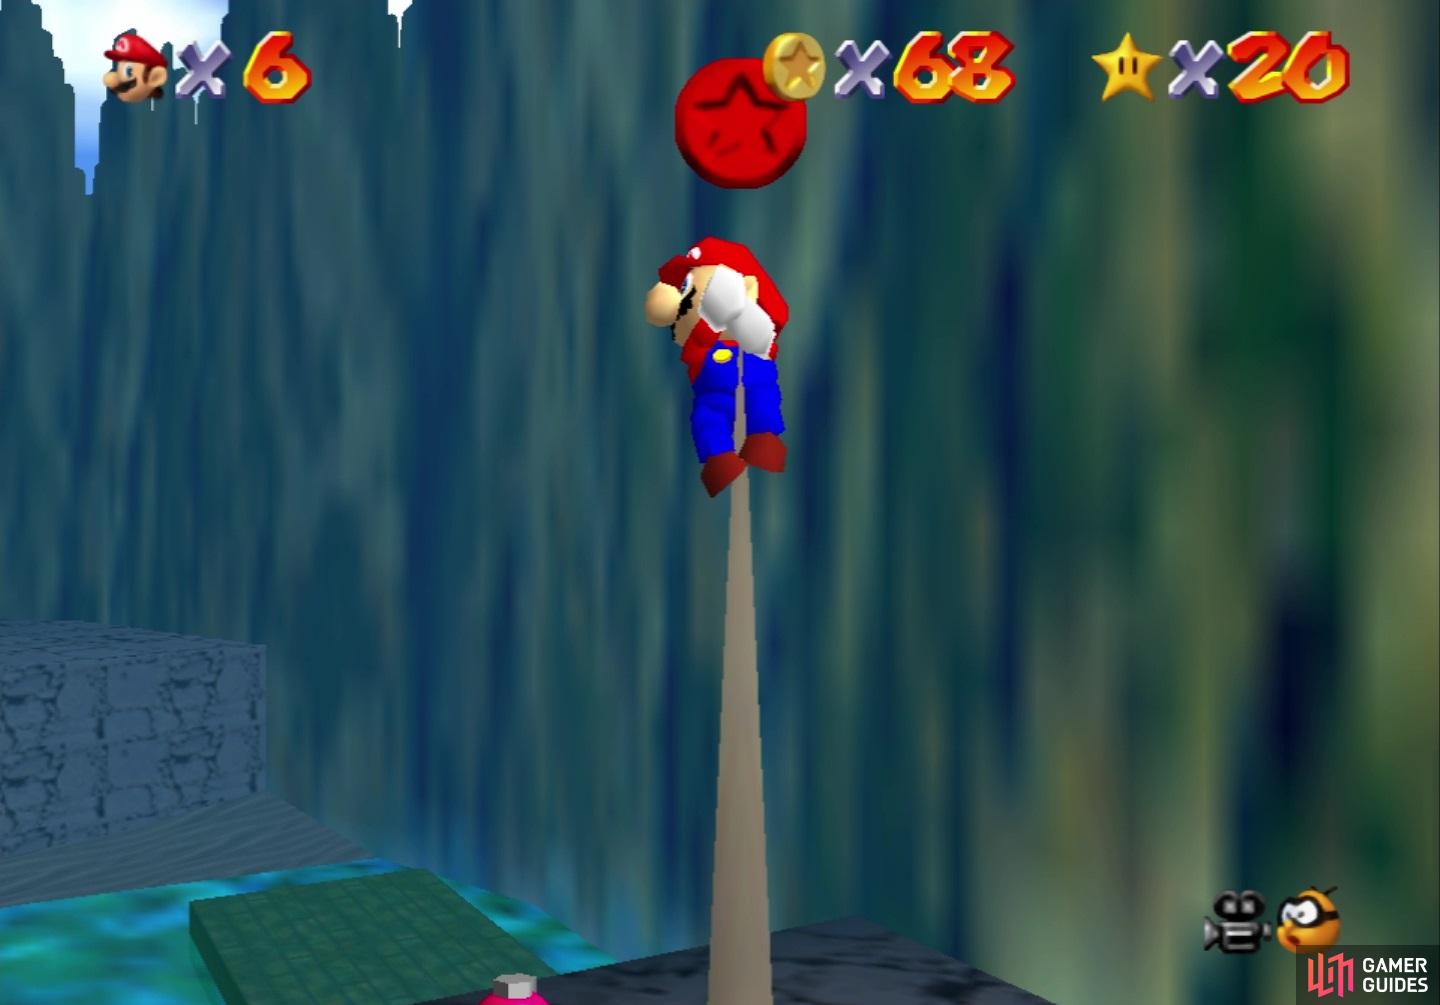 This Red Coin is found on the spire by the Bob-Omb Buddy